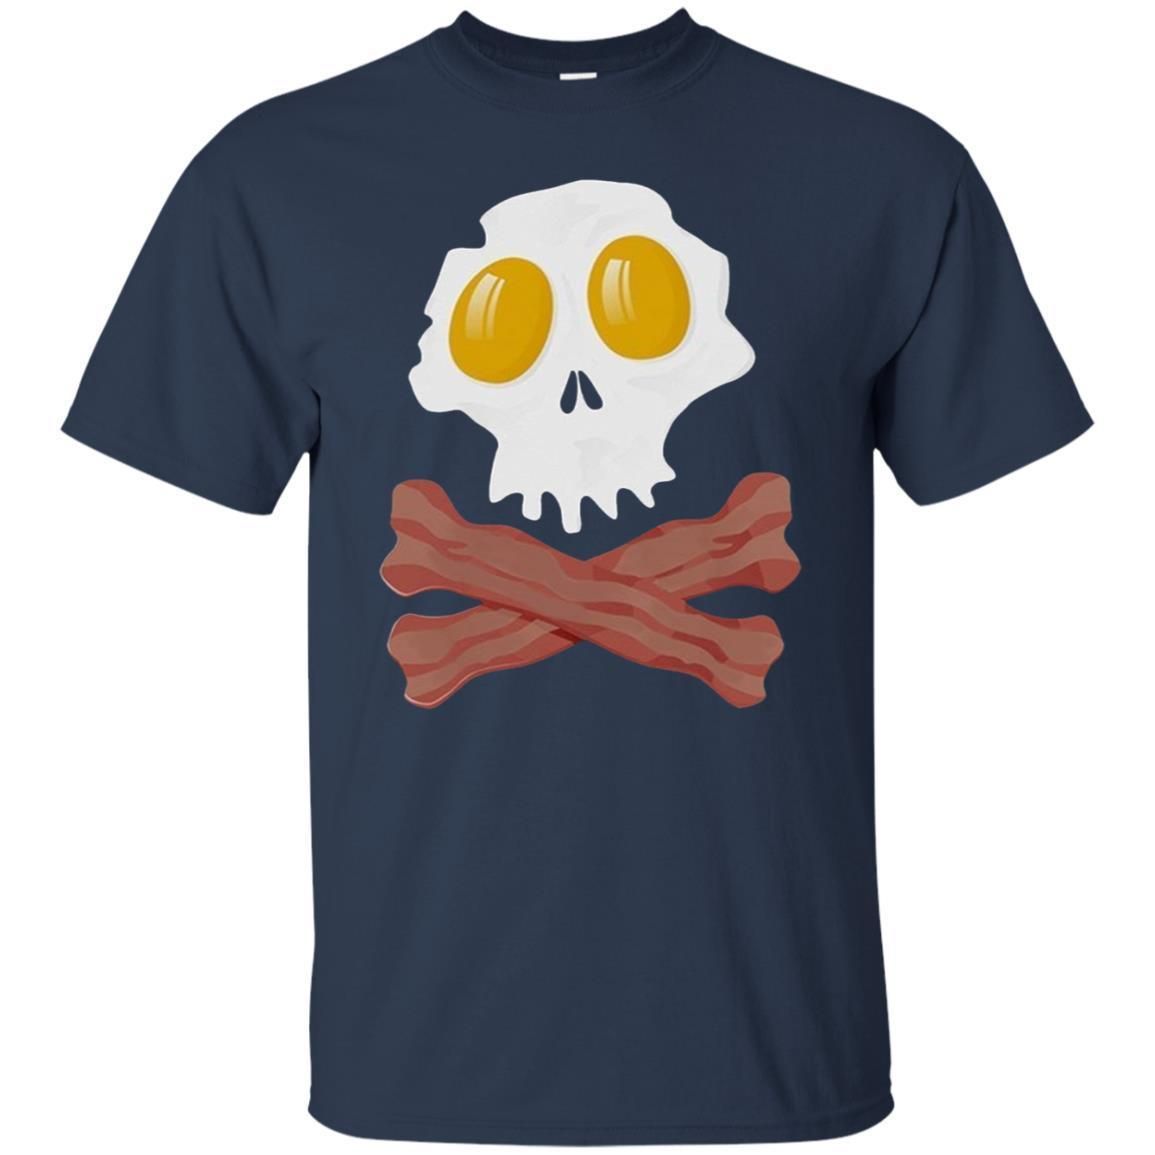 Skull eggs and bacons